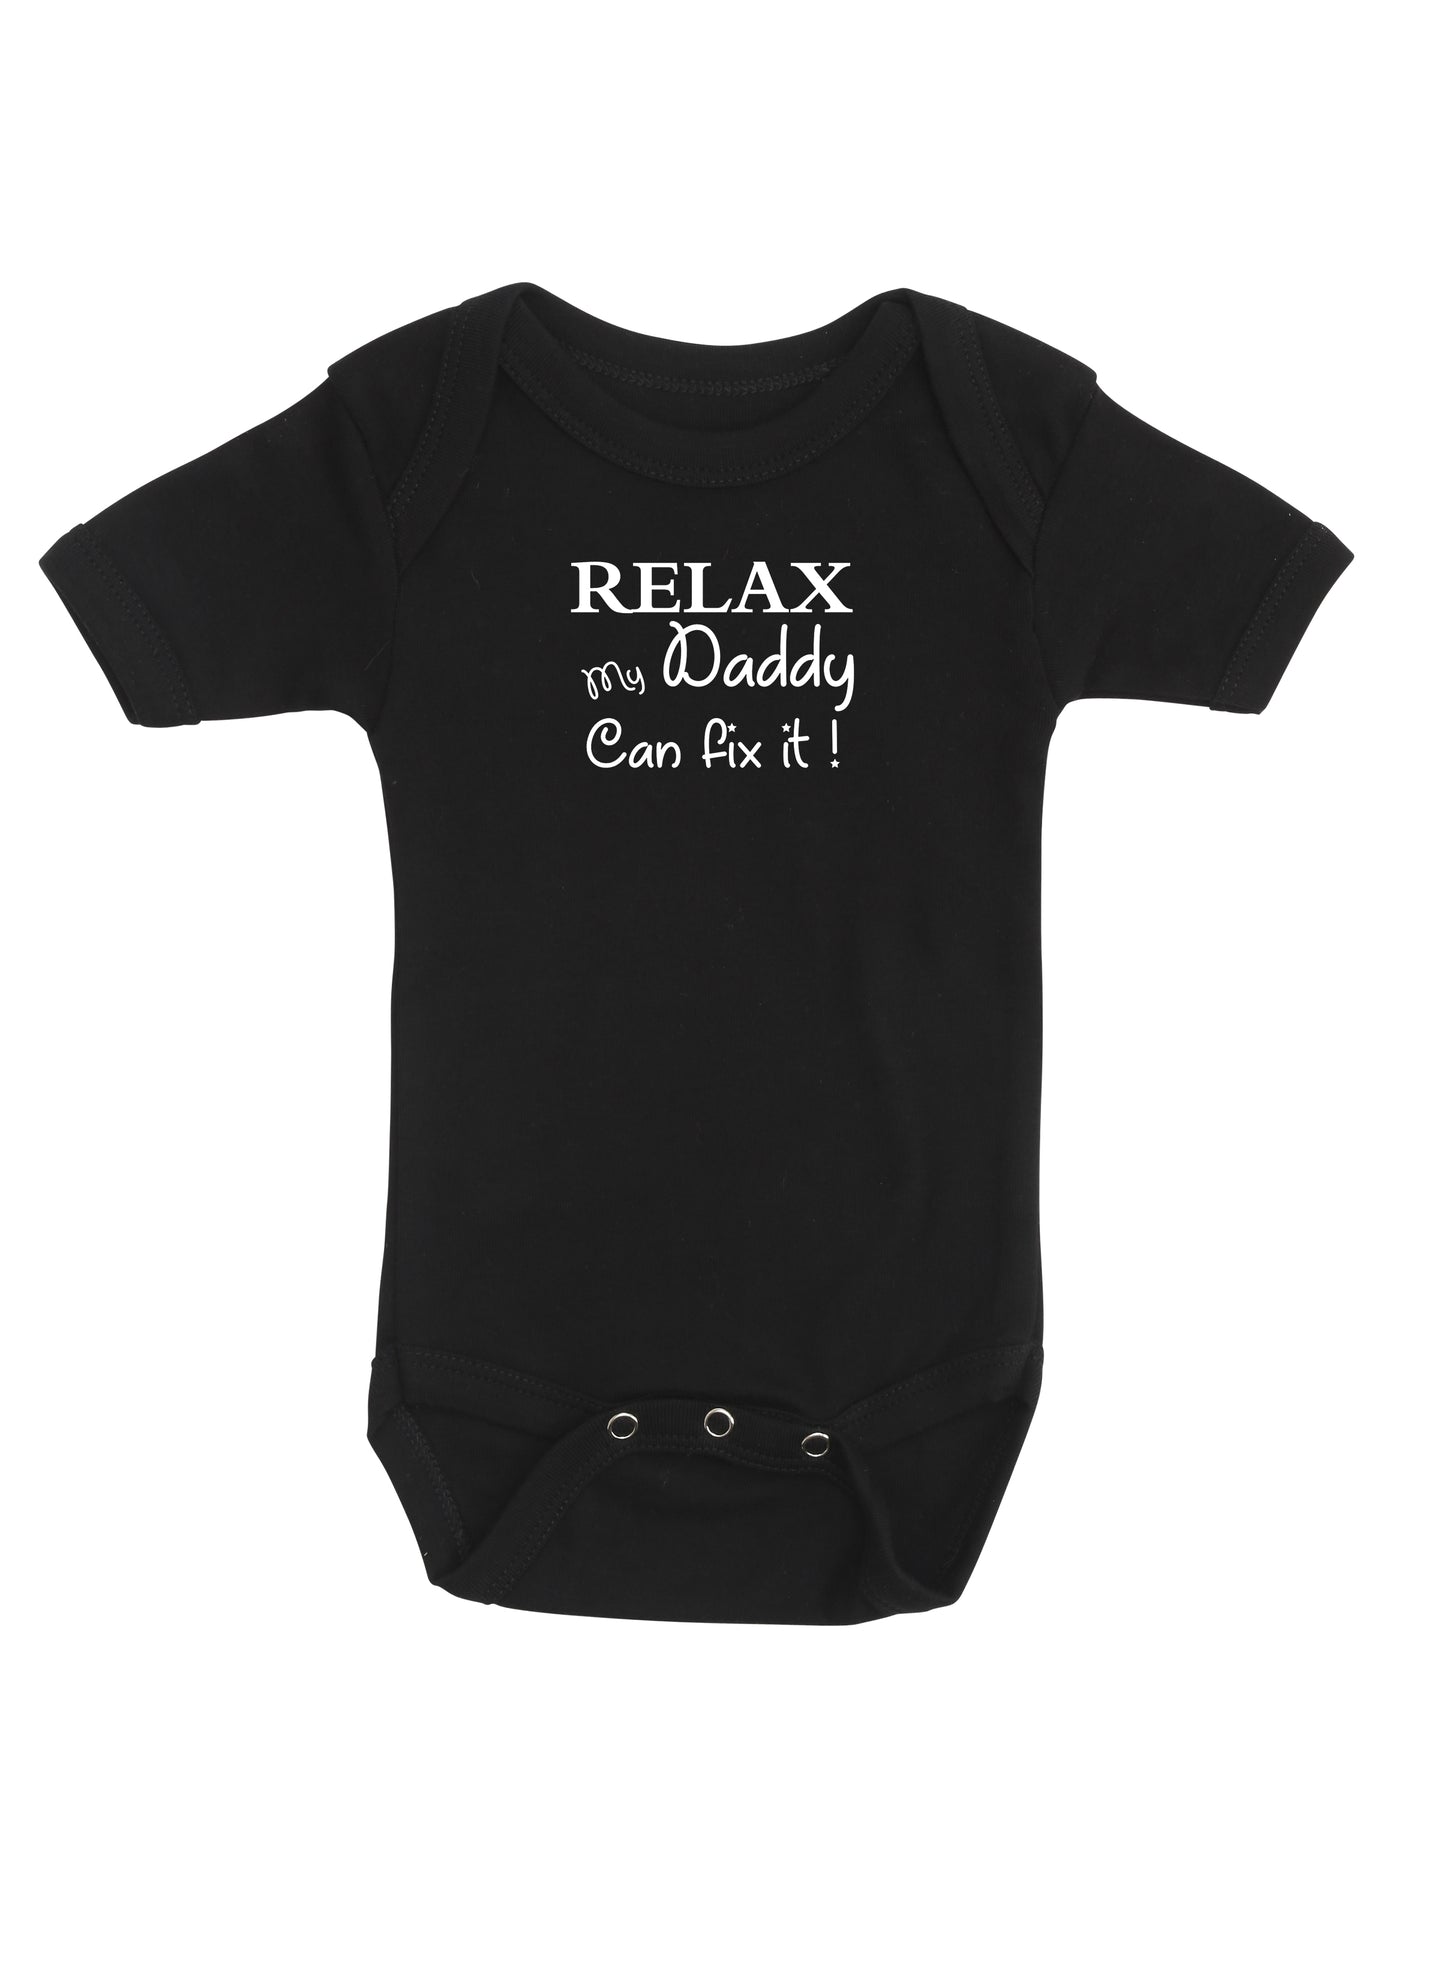 Relax - my Daddy can fix it !